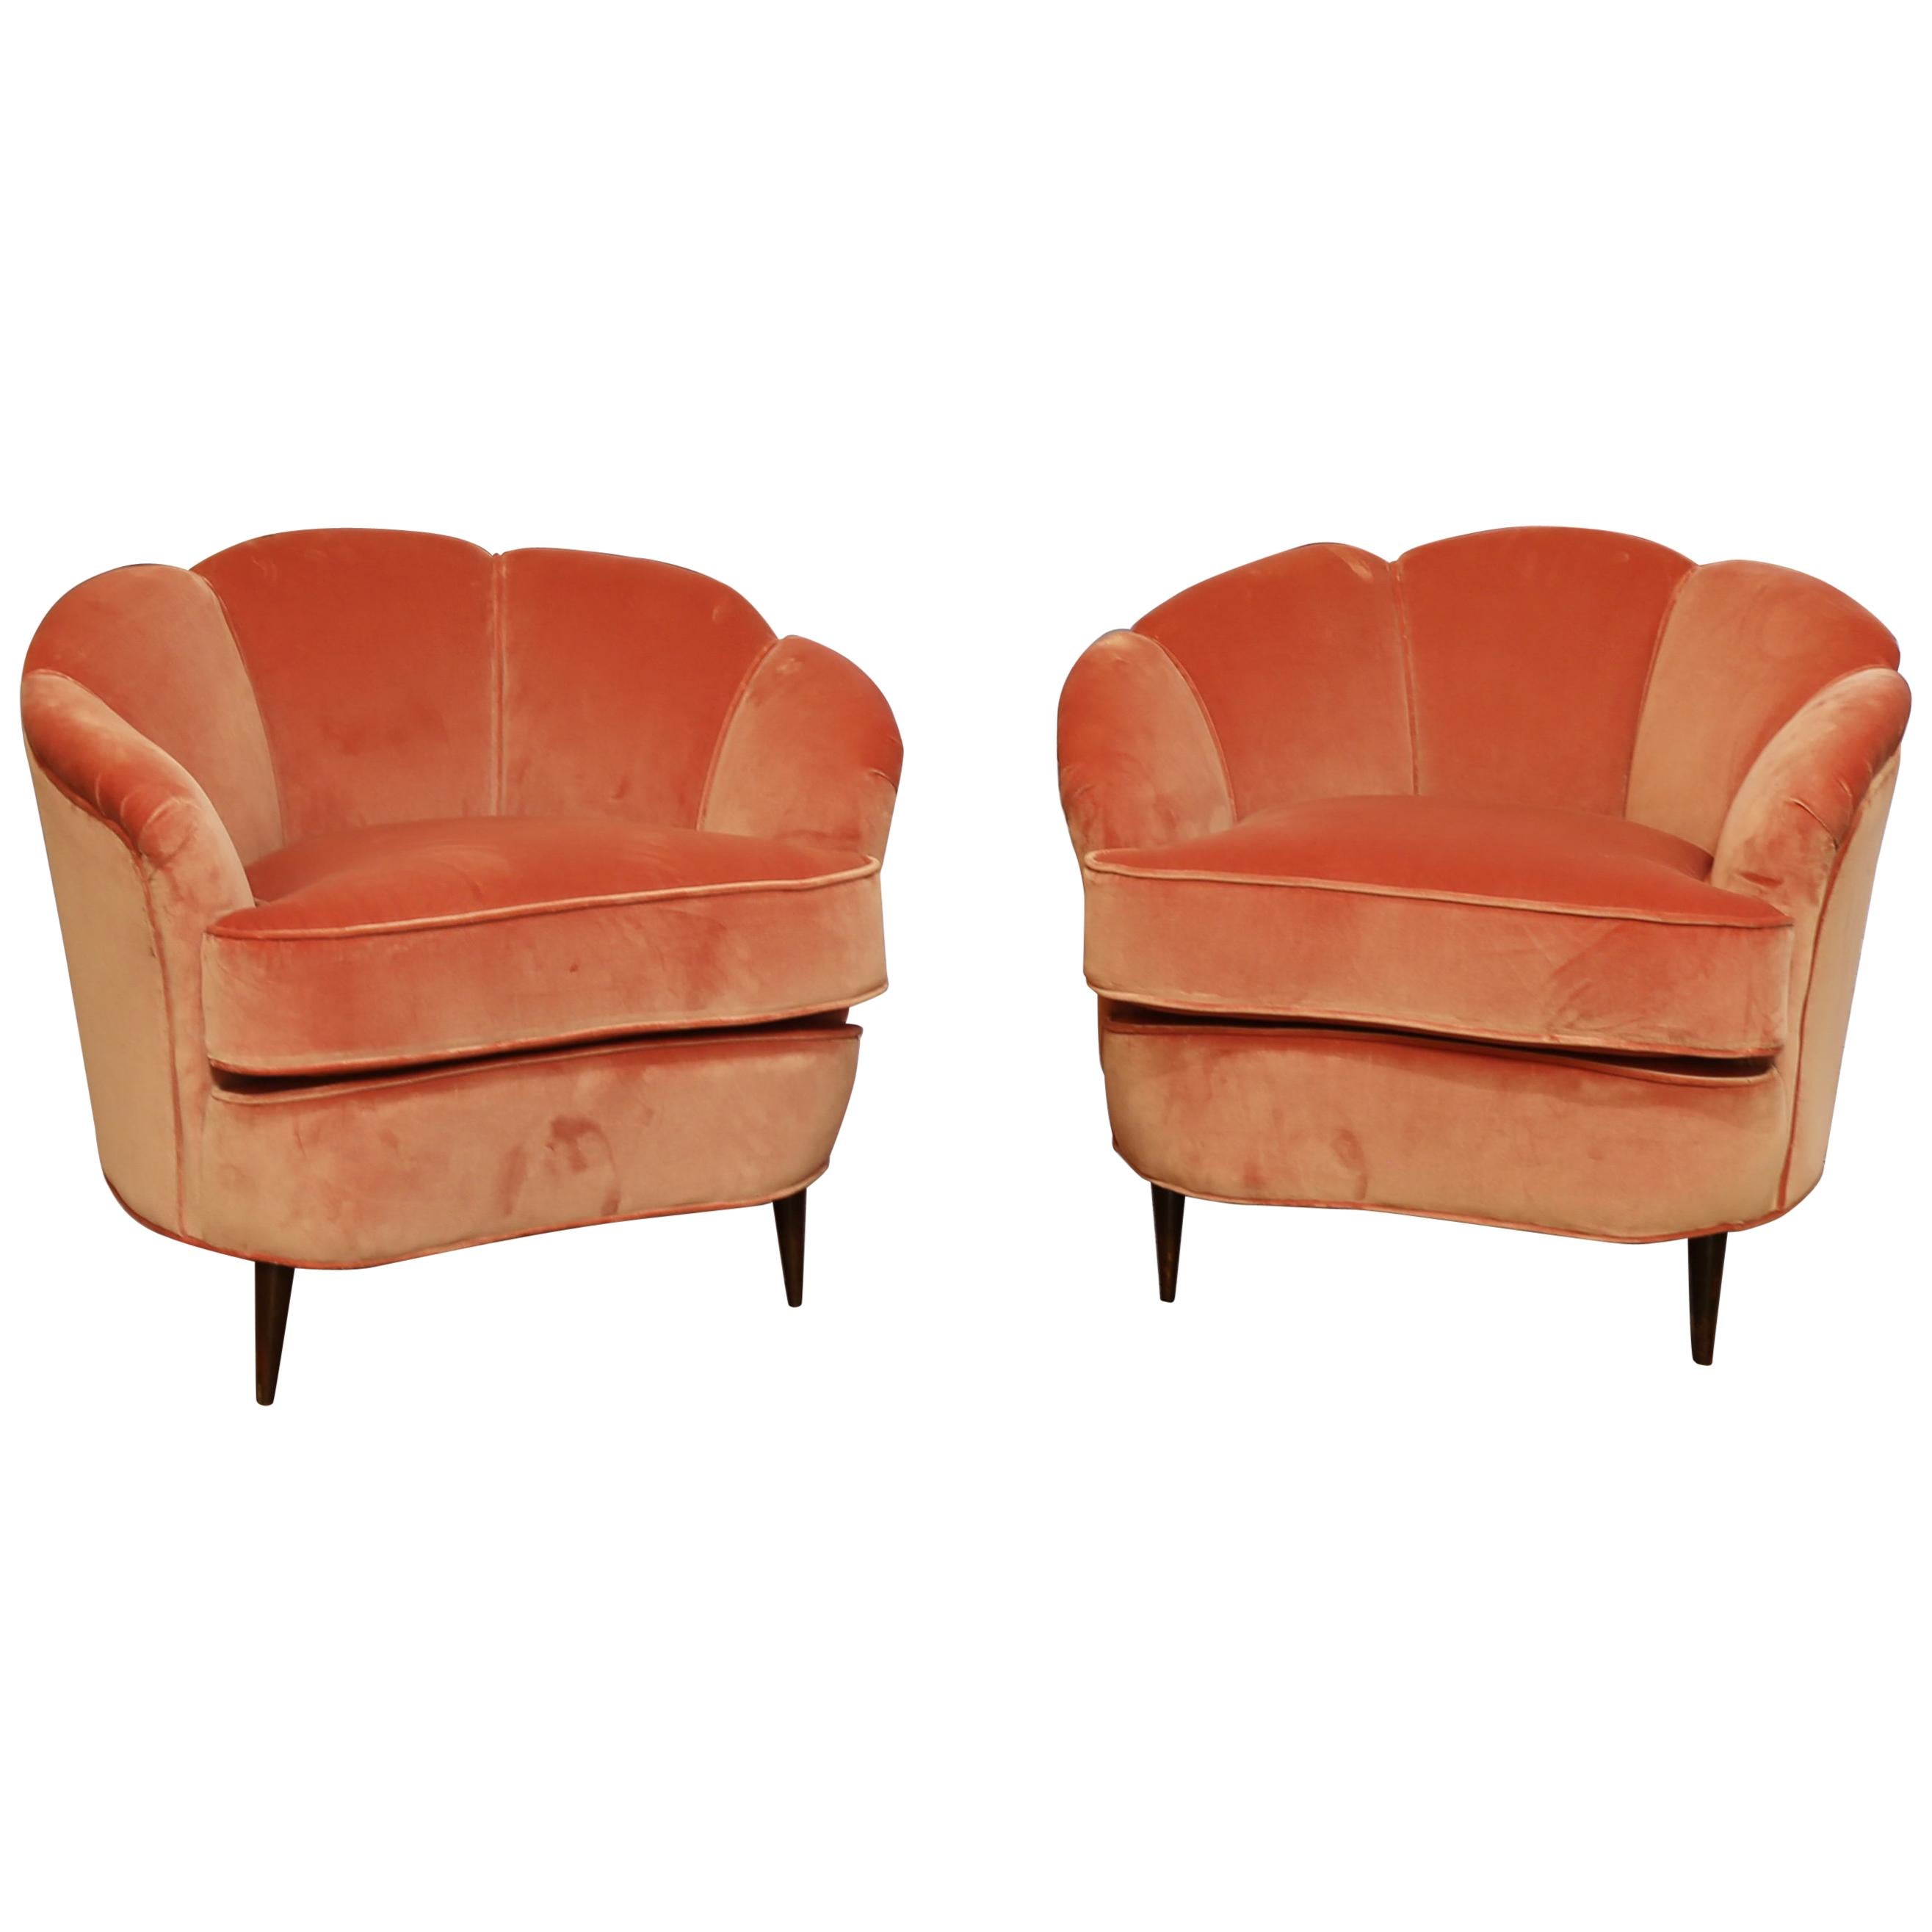 Pair of 1940s Gio Ponti Style Italian Scallop Lounge Chairs